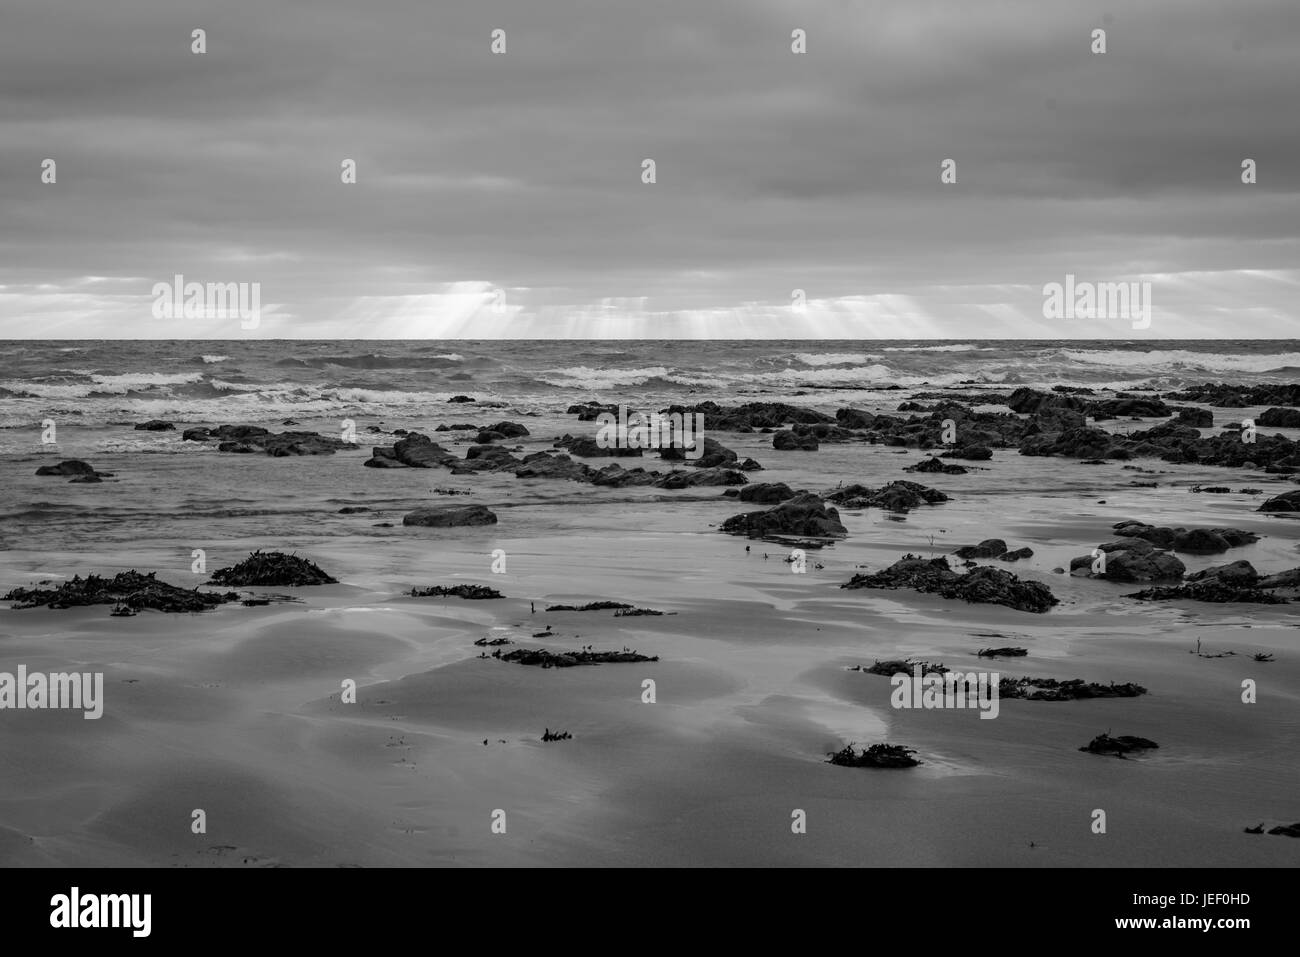 Widemouth bay Black and White Stock Photos & Images - Alamy